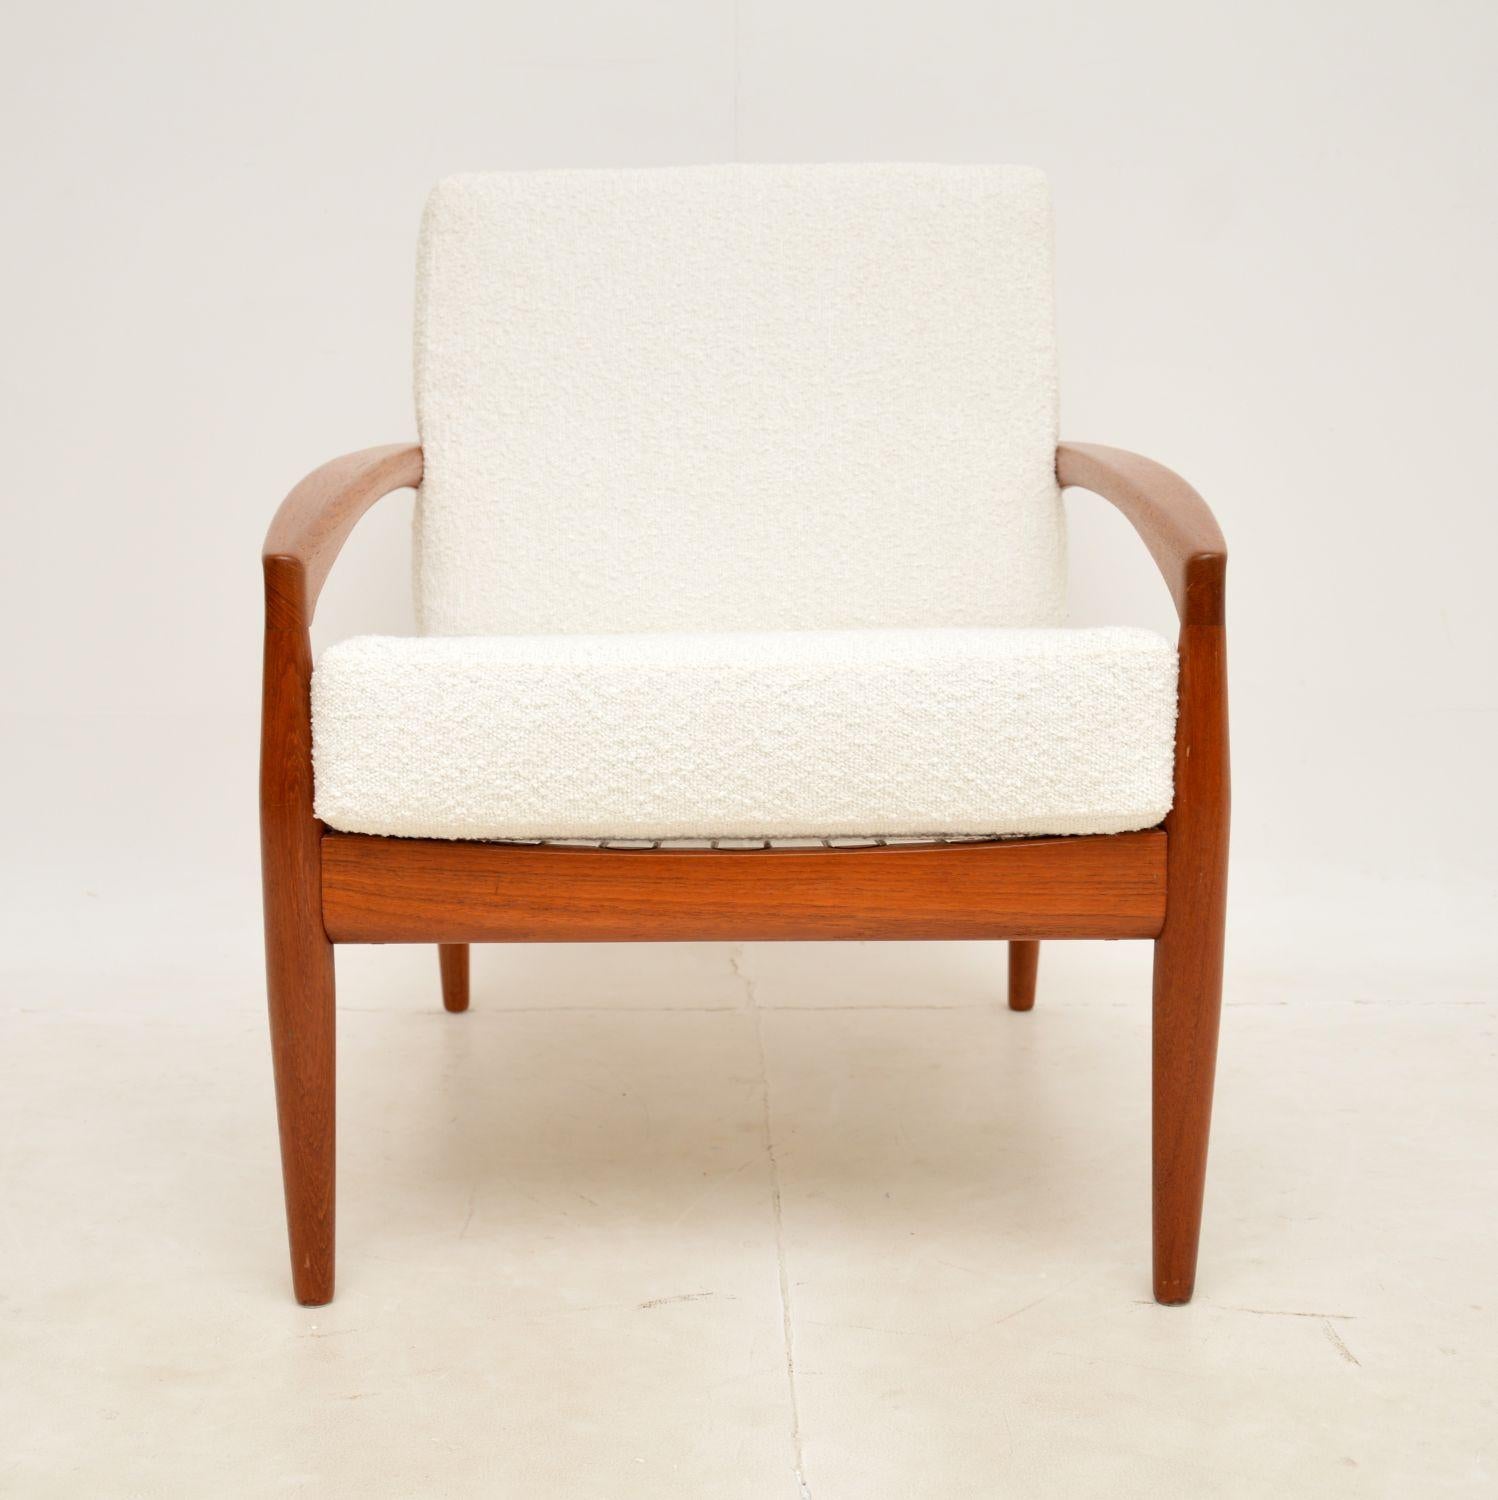 A stunning and iconic Danish design, this is the ‘Paper Knife’ armchair by Kai Kristiansen in solid teak. It was made in Denmark, it dates from the 1960s.

The quality is outstanding, this has a gorgeous sleek and sculptural design. It is well made,